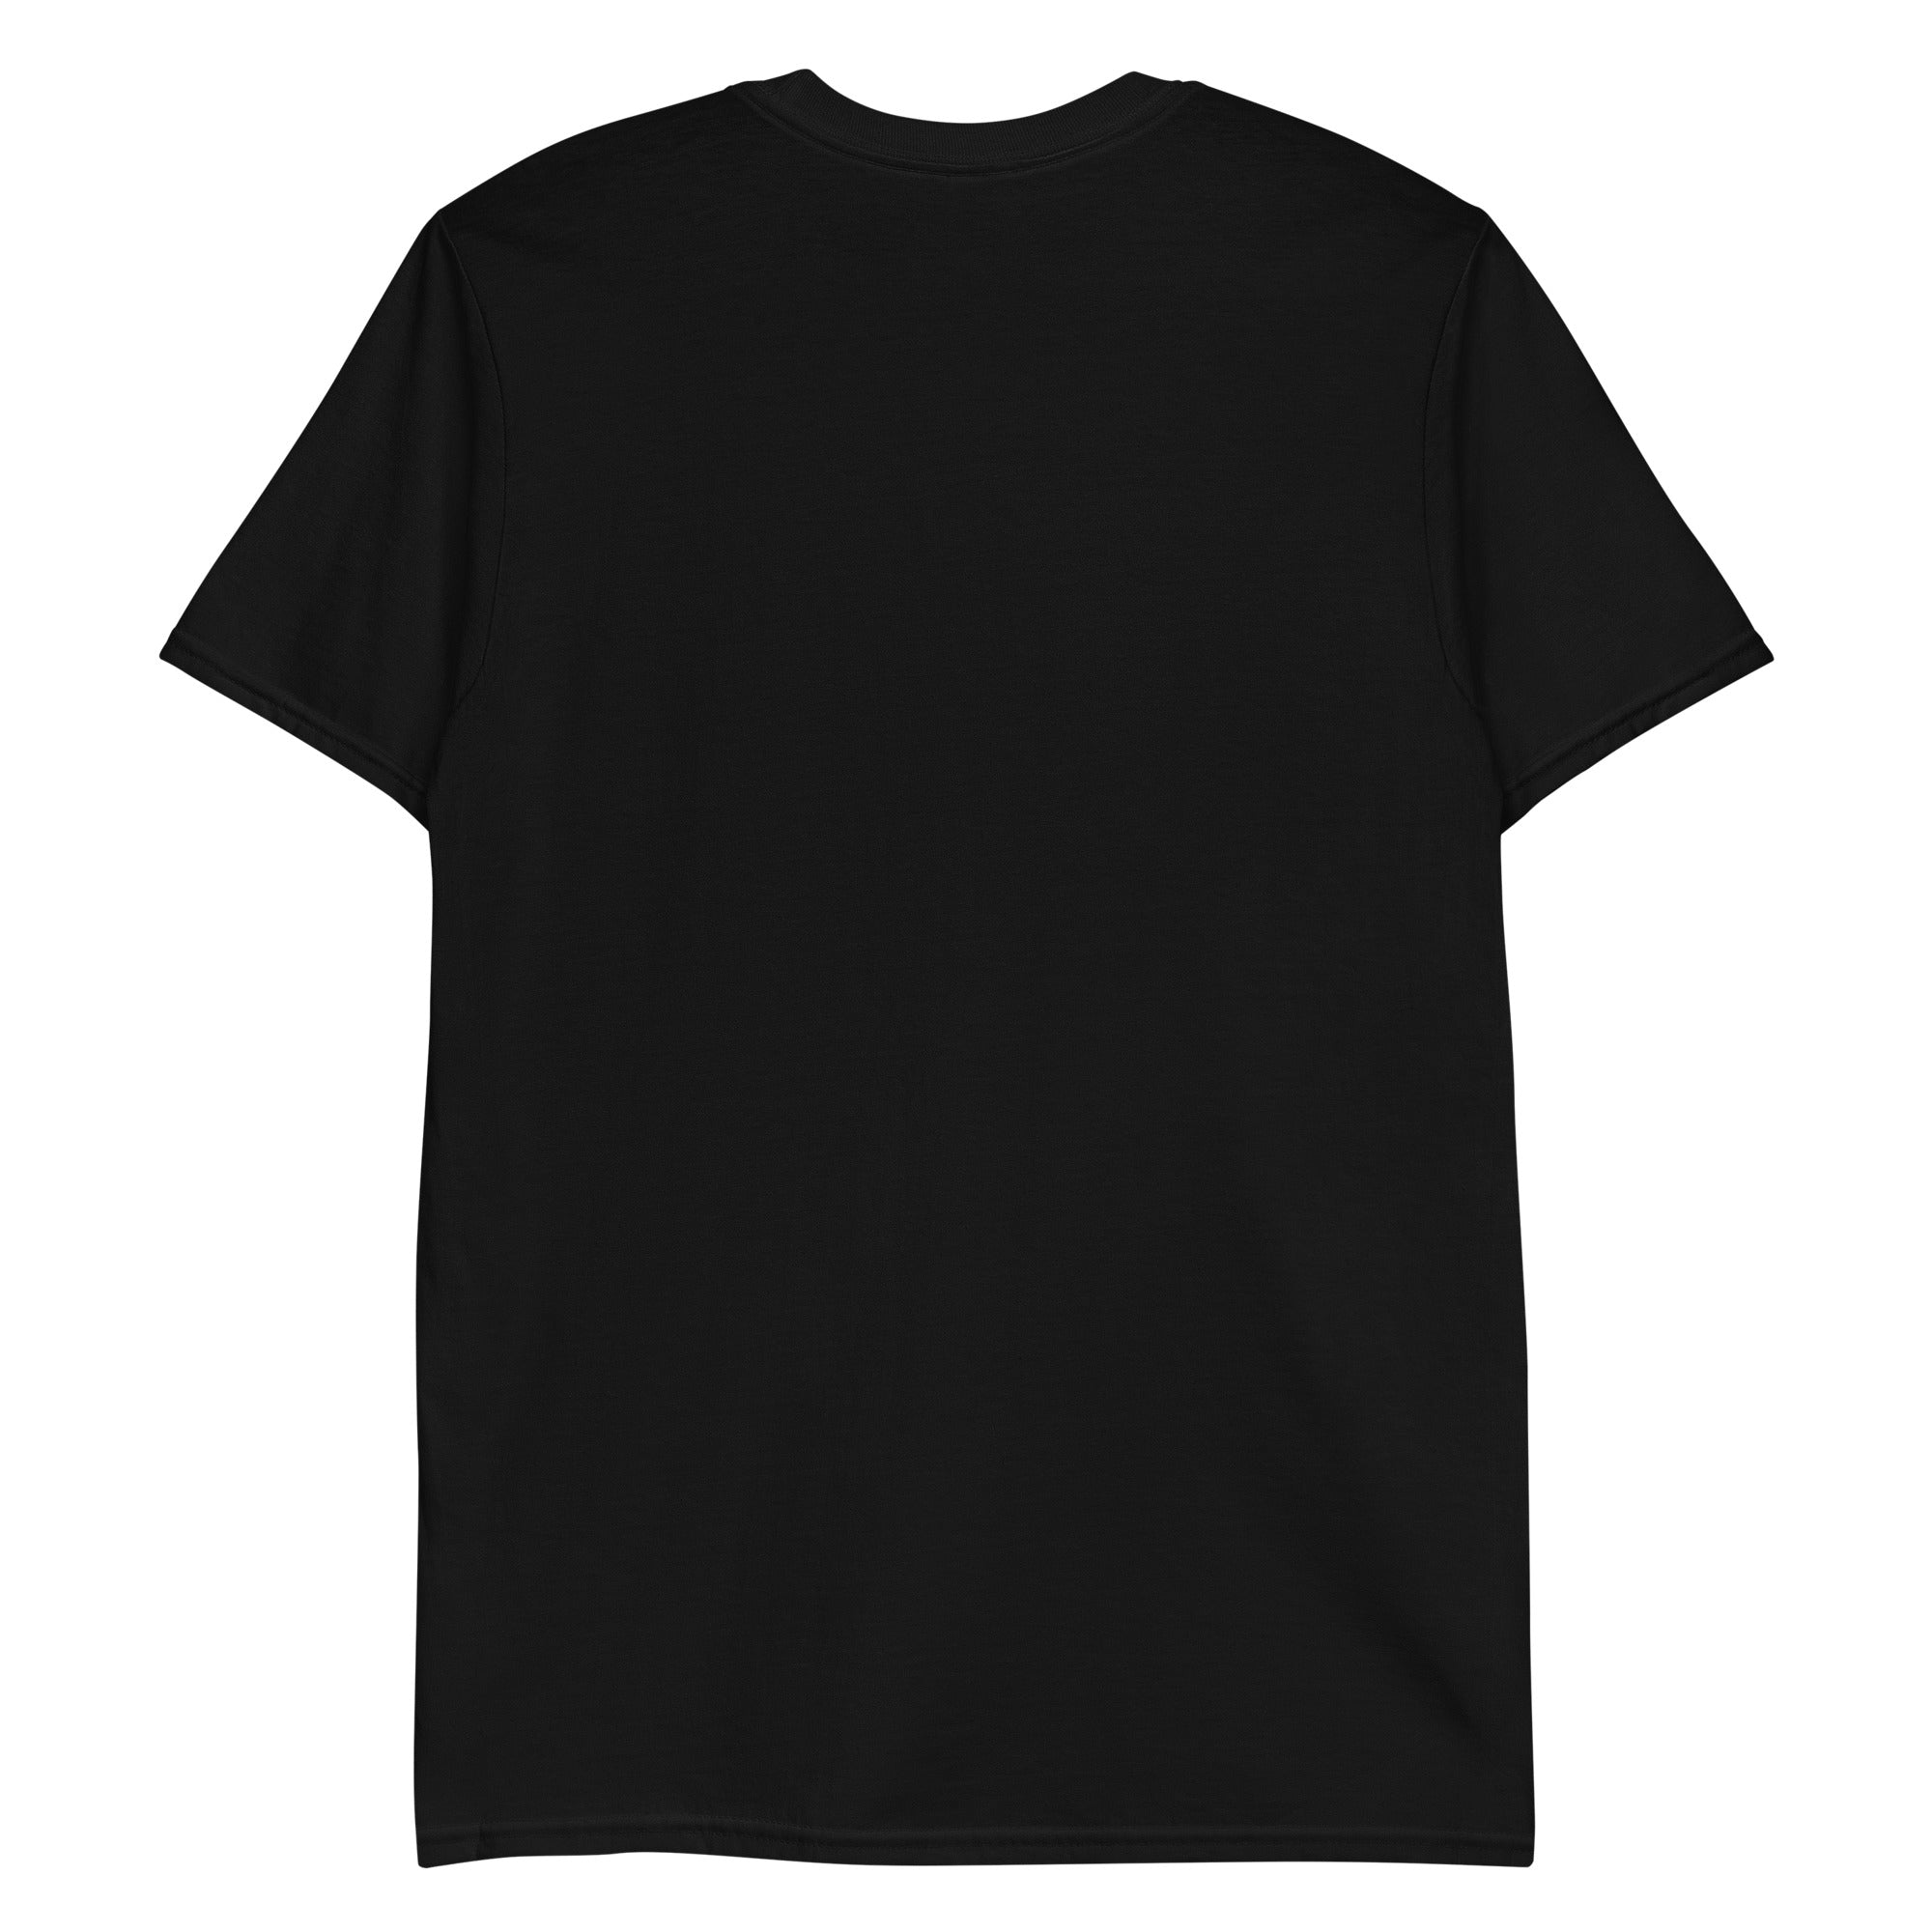 LimeLife by Alcone - Short-Sleeve Unisex T-Shirt